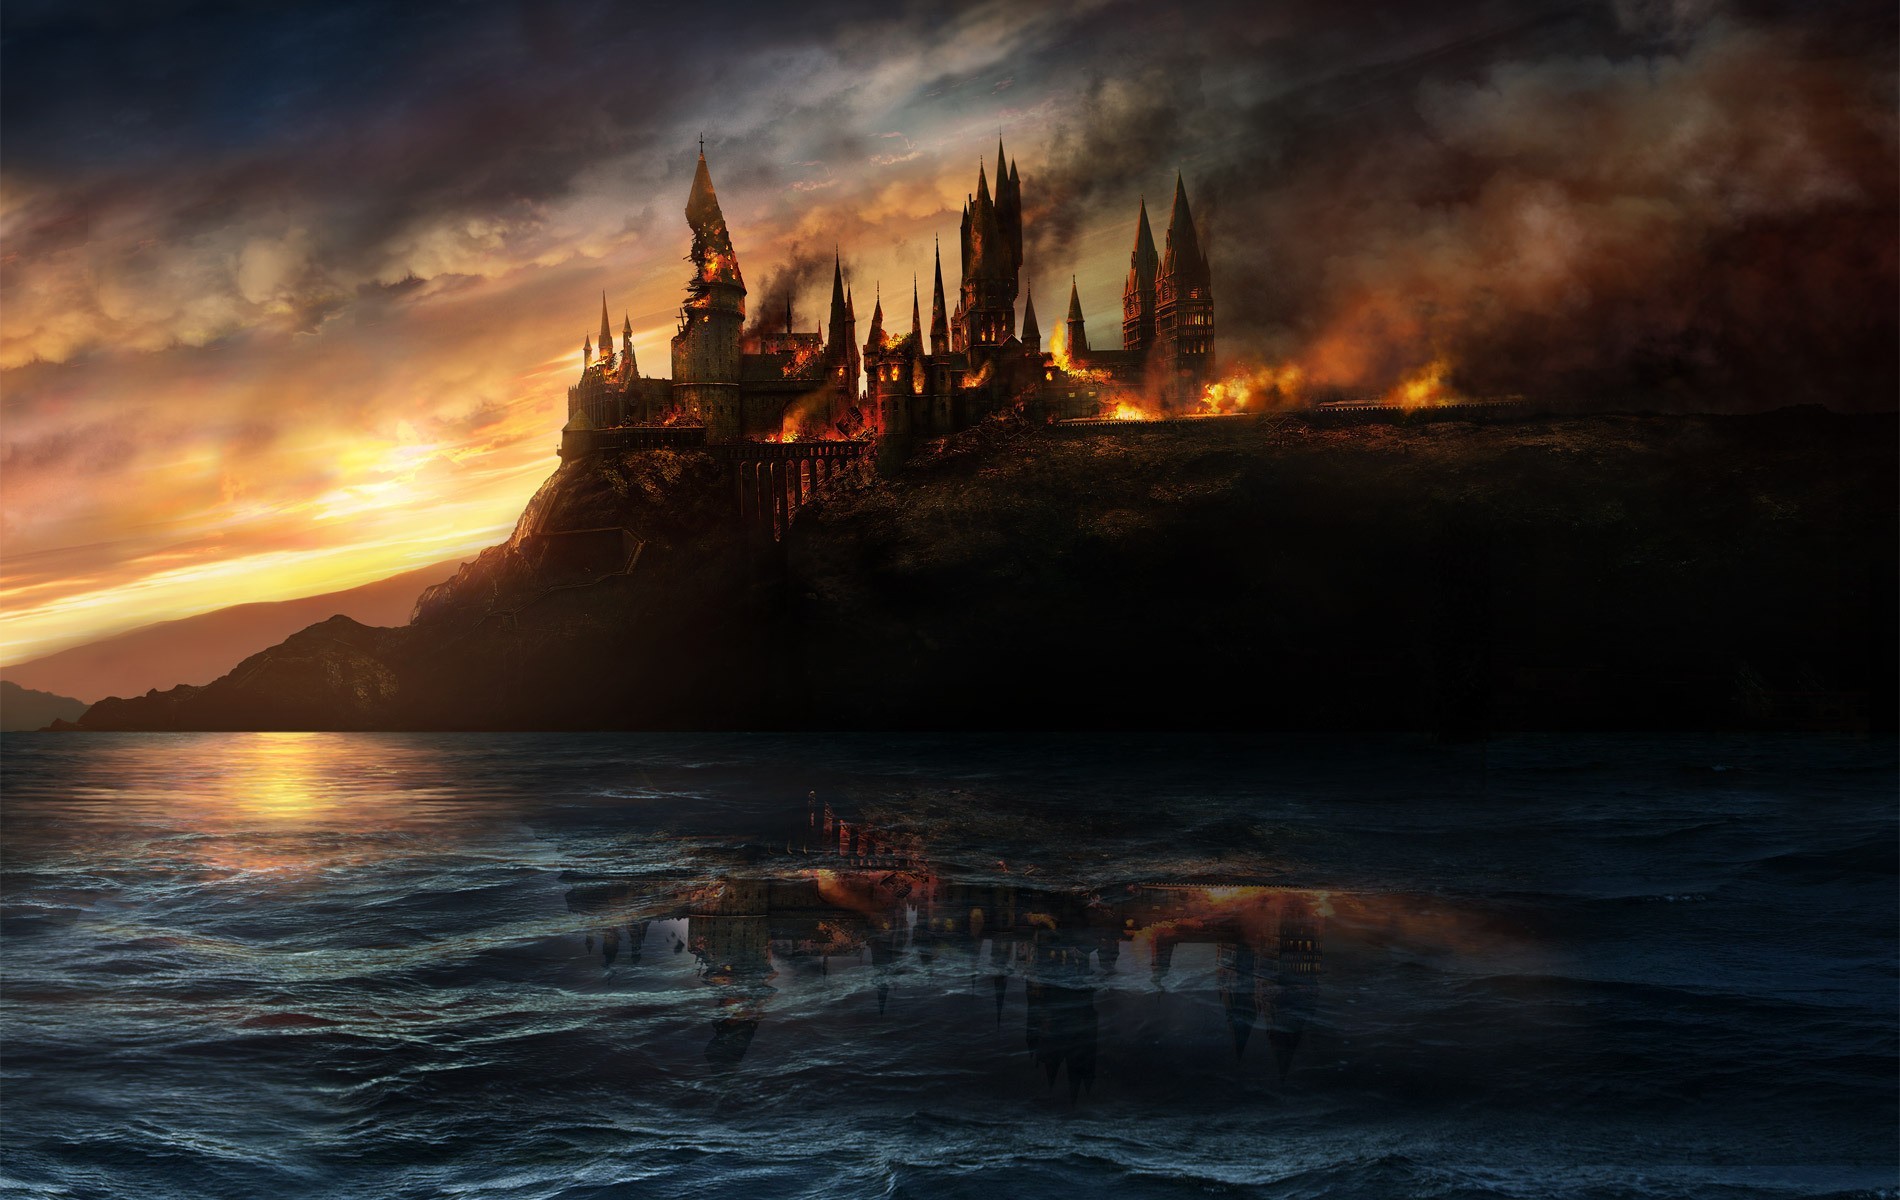 fantasy art, Fire, Sea, Clouds, Reflection, Hogwarts, Harry Potter and the Deathly Hallows, Movies Wallpaper